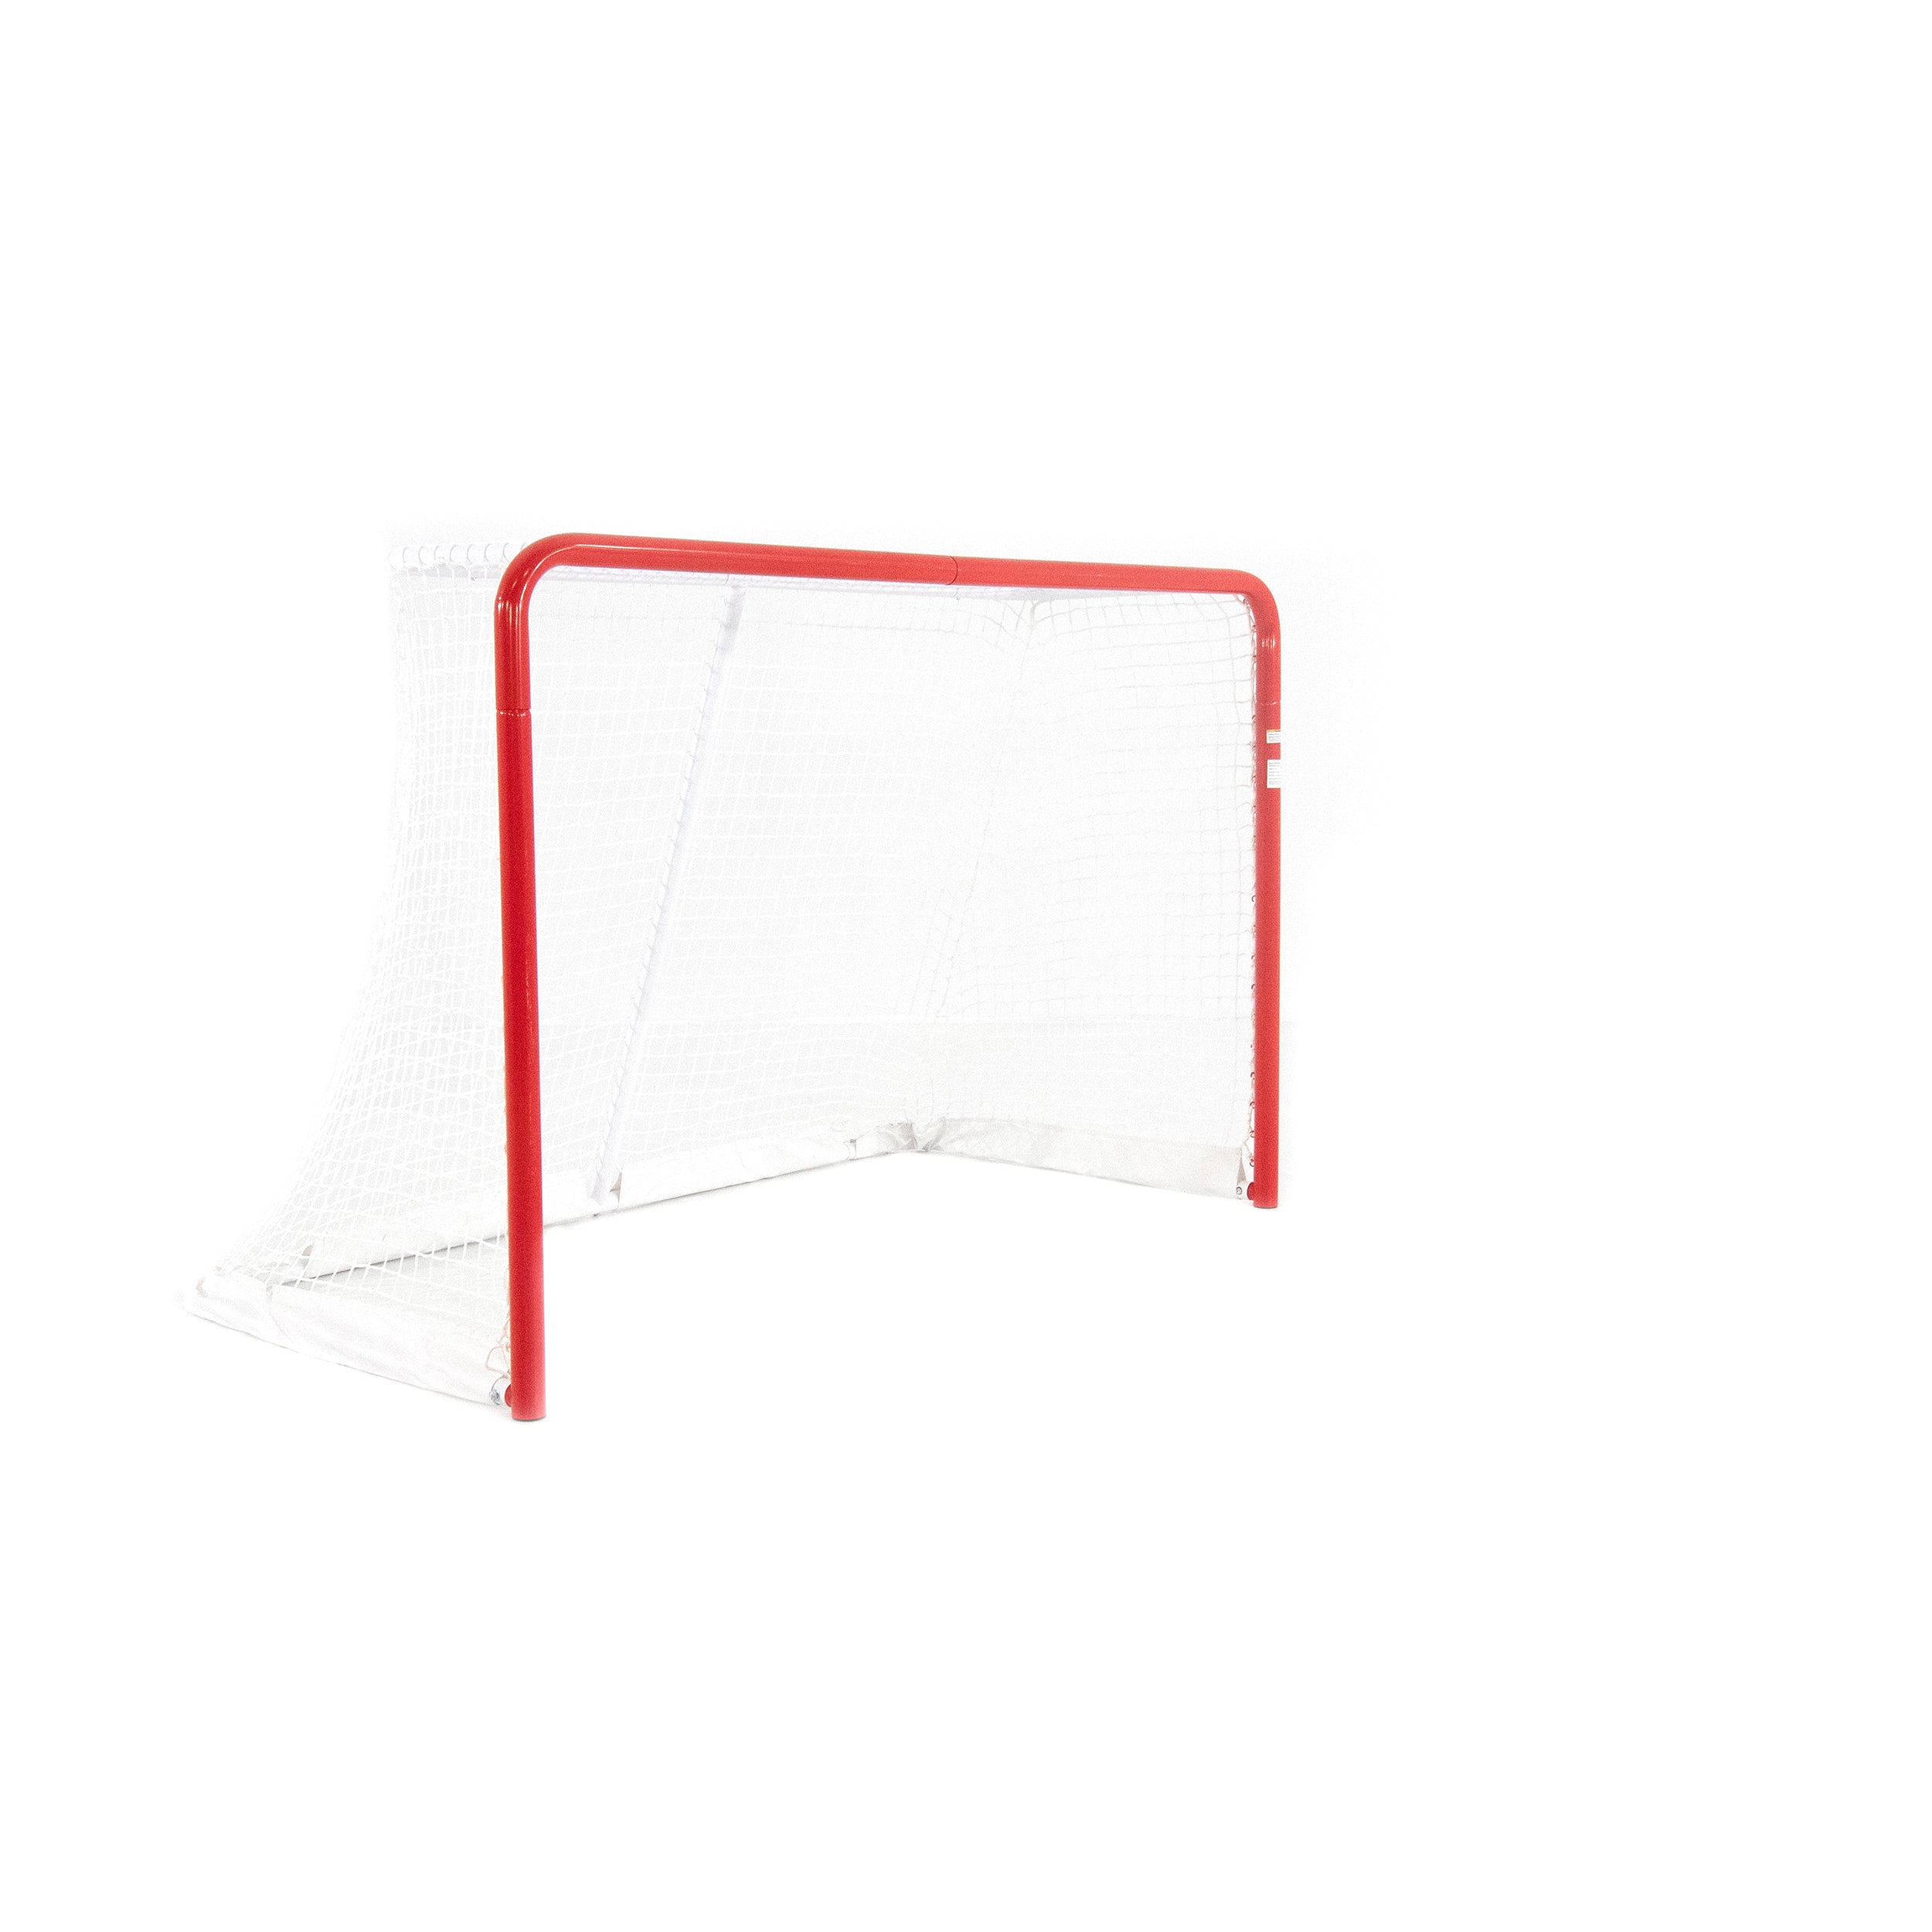 Red and white Skywalker Sports regulation size hockey goal.